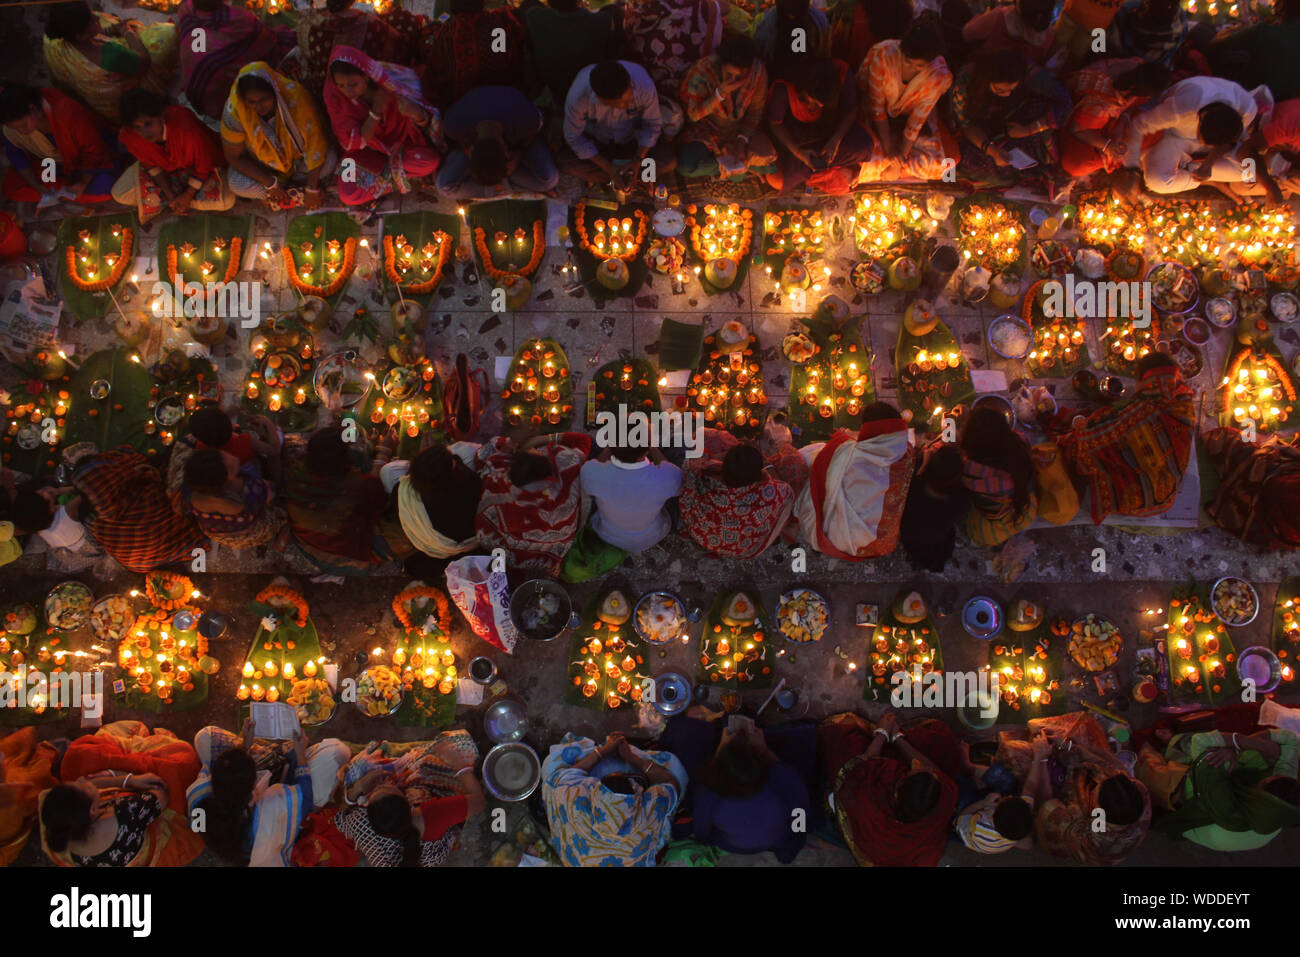 Directly Above Shot Of People With Illuminated Diyas During Religious Fasting At Night Stock Photo